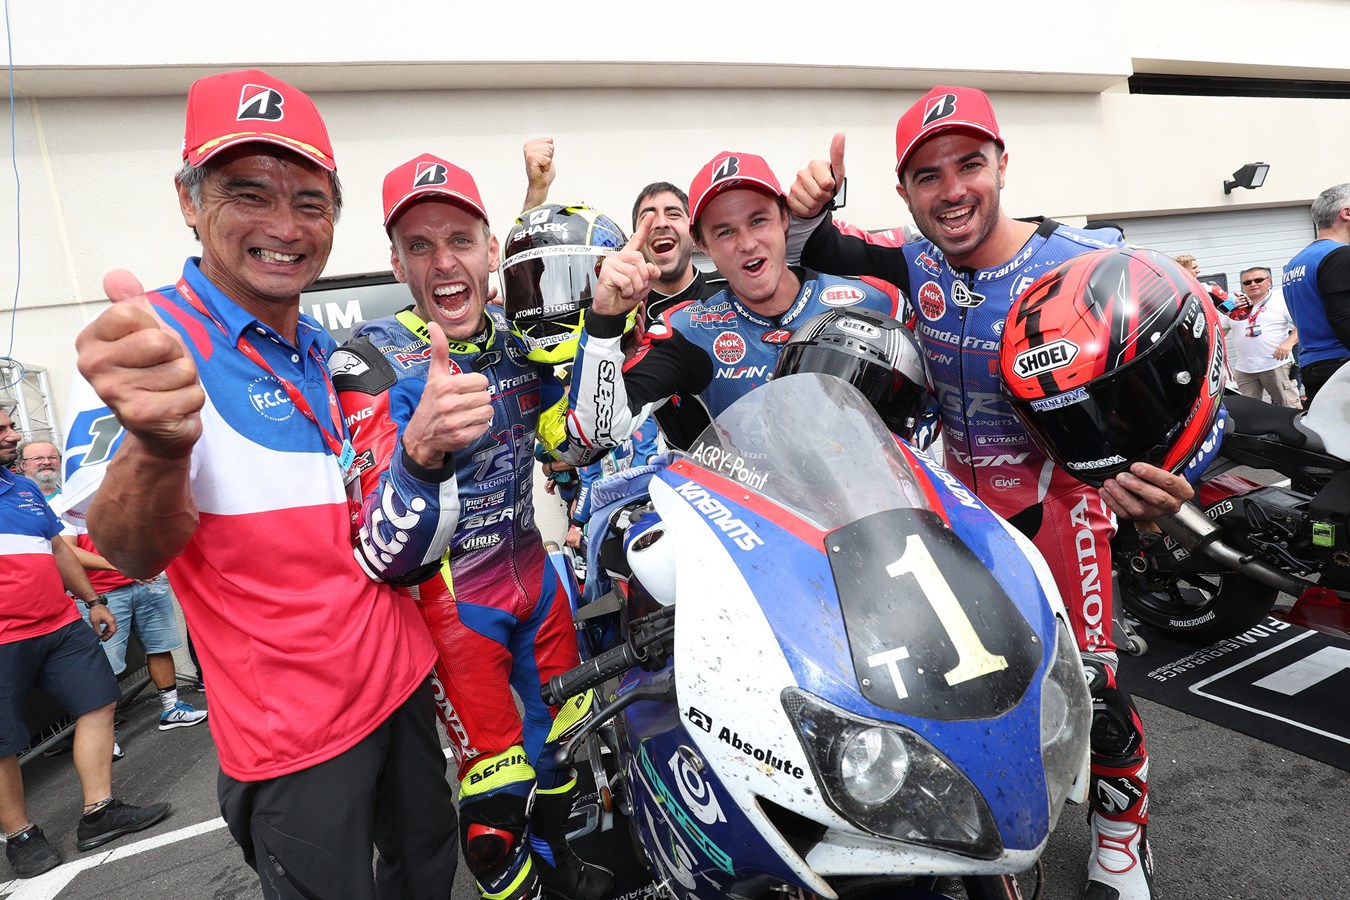 Victory for F.C.C. TSR Honda France at the Bol d’Or